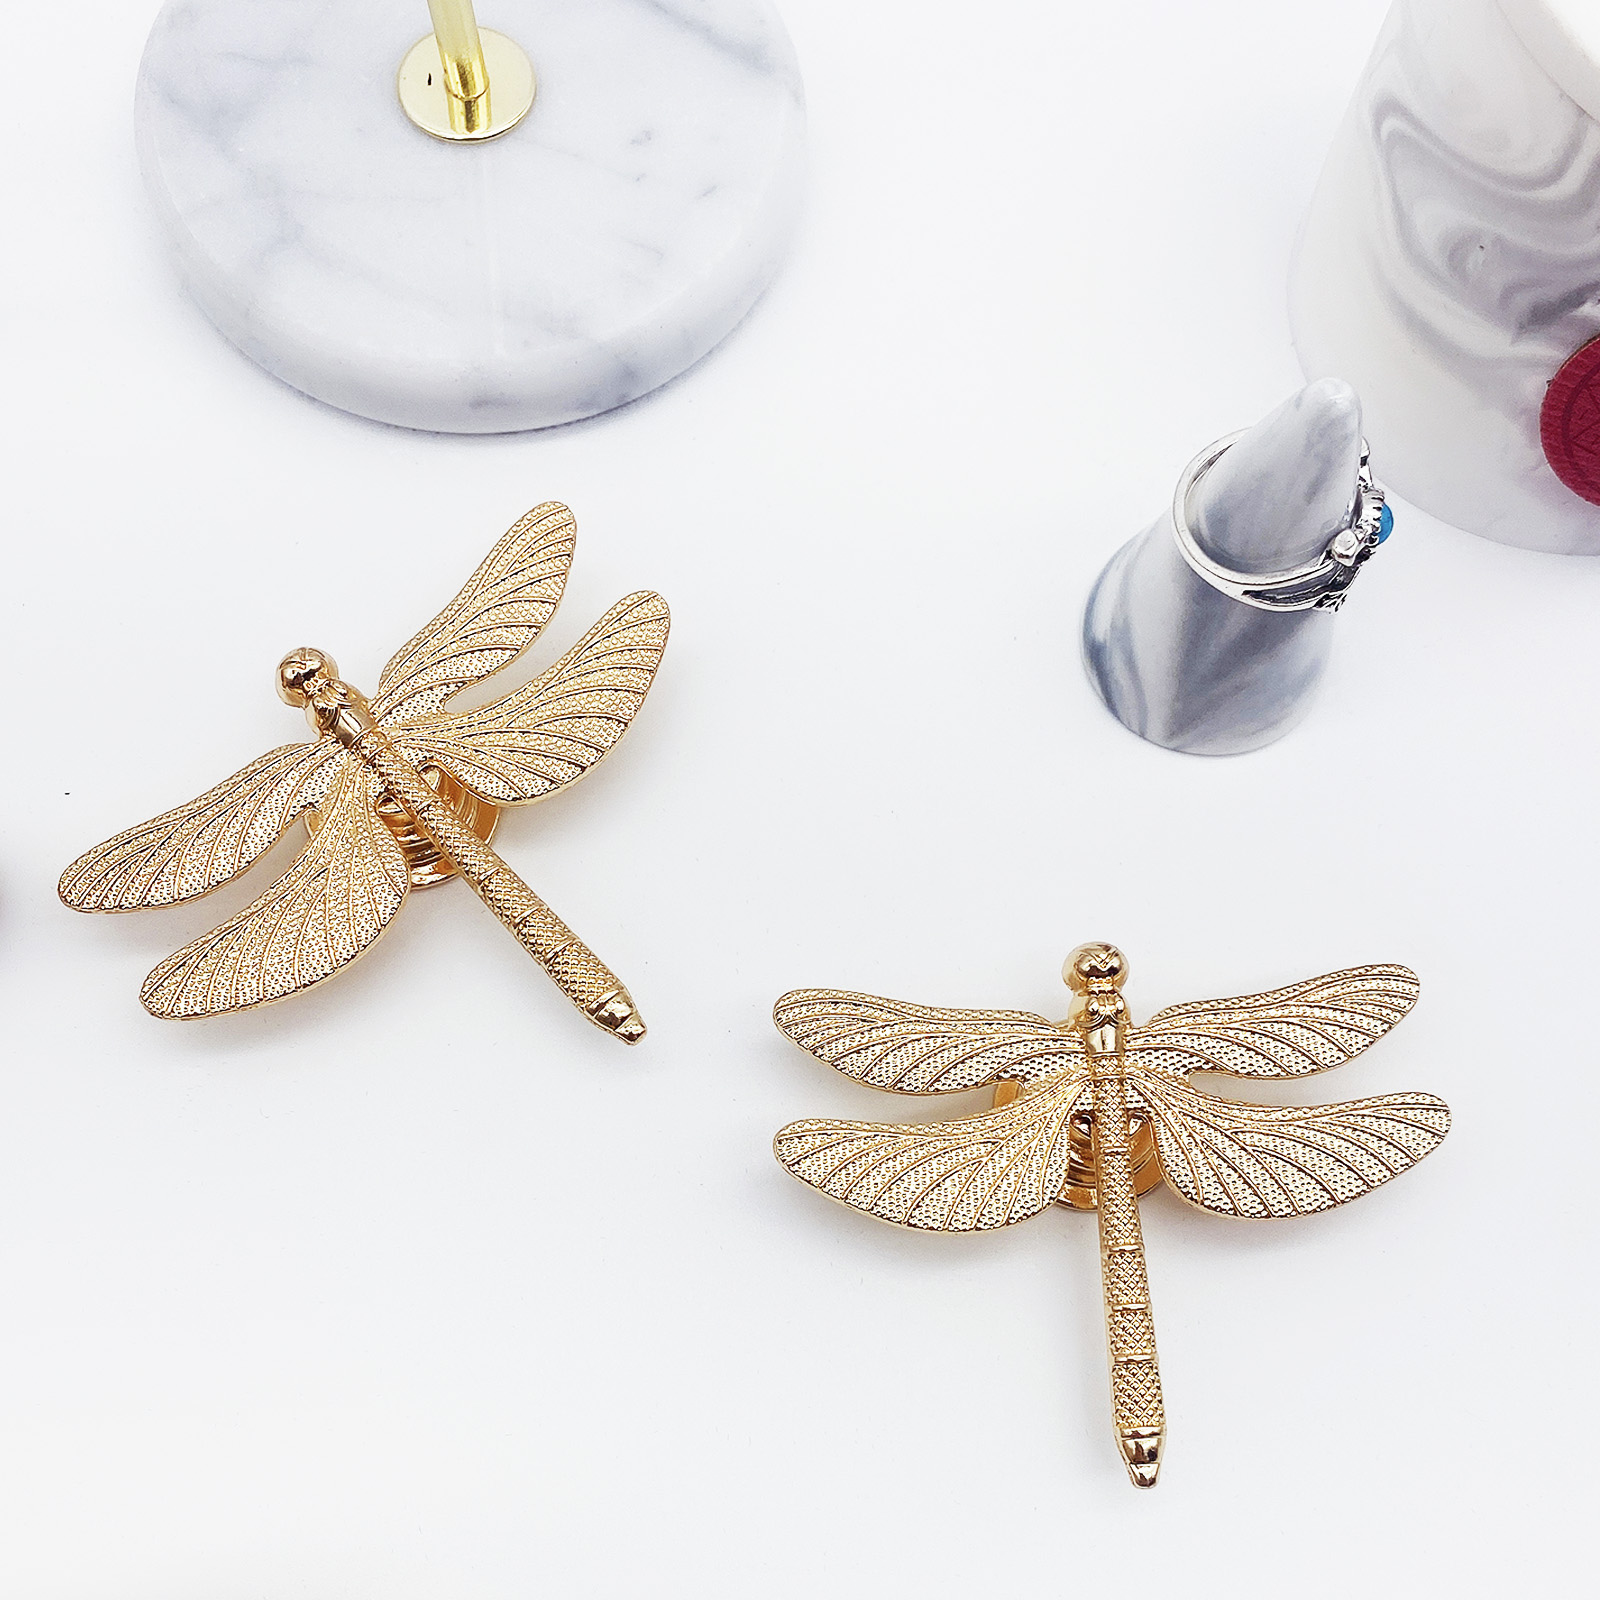 4 pcs Creative Dragonfly Knobs Drawer/Cabinet Pull Handles Alloy Cabinet Knobs Gold Drawer Cupboard Wardrobe Dresser Pulls Knobs Hardware - image 5 of 6